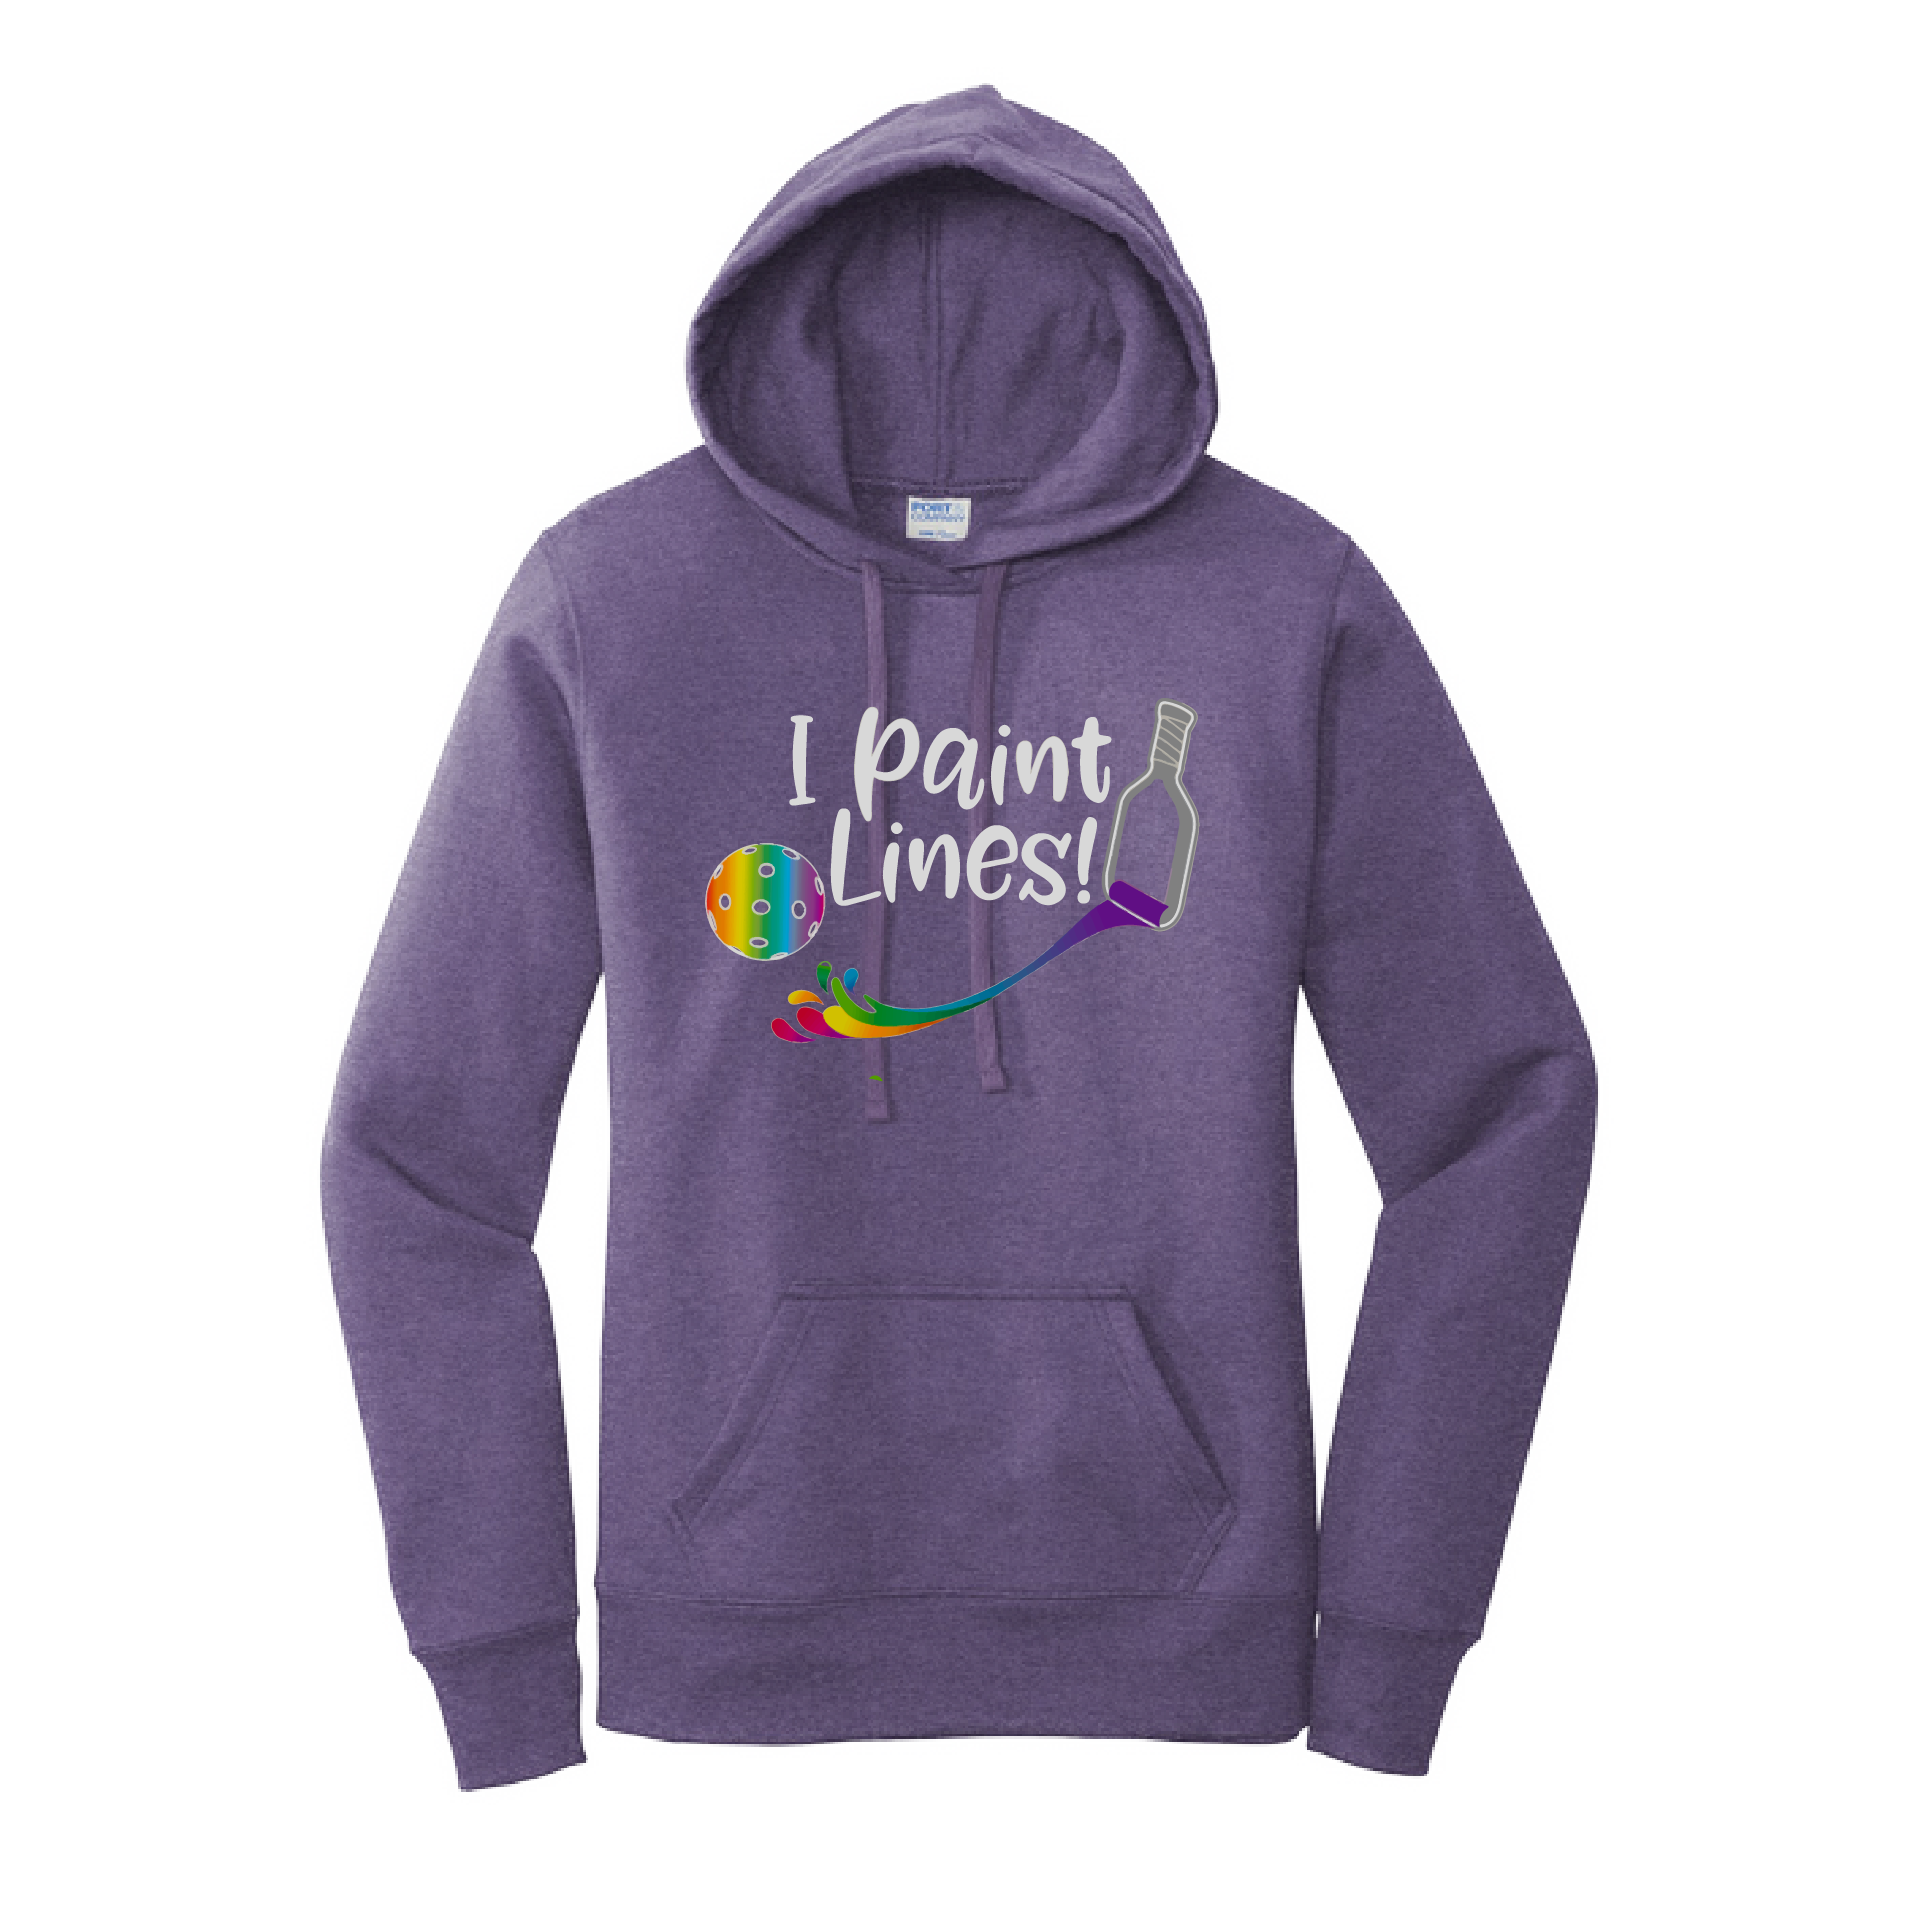 Pickleball Design: I Paint Lines  Women's Hooded pullover Sweatshirt  Turn up the volume in this Women's Sweatshirts with its perfect mix of softness and attitude. Ultra soft lined inside with a lined hood also. This is fitted nicely for a women's figure. Front pouch pocket.